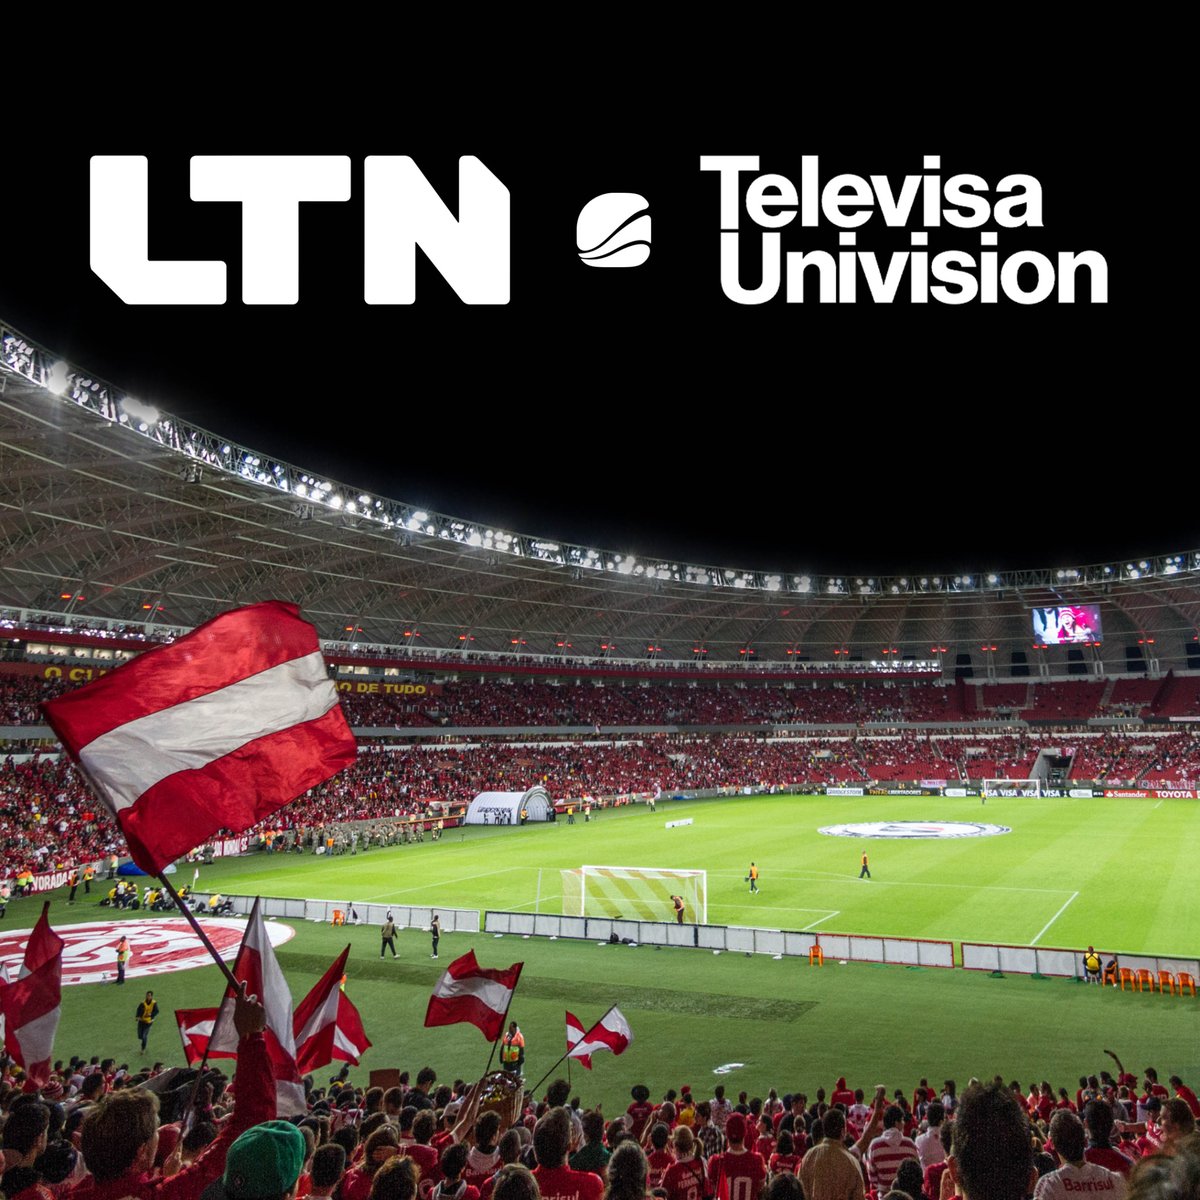 LTN announces leading Spanish-language media organization, @TeleUniCompany, to migrate to IP-based video distribution via LTN Wave — learn more about our new partnership here: go.ltnglobal.com/tvu-press-tw #LTN #NABShow #IPdistribution #broadcastsolutions